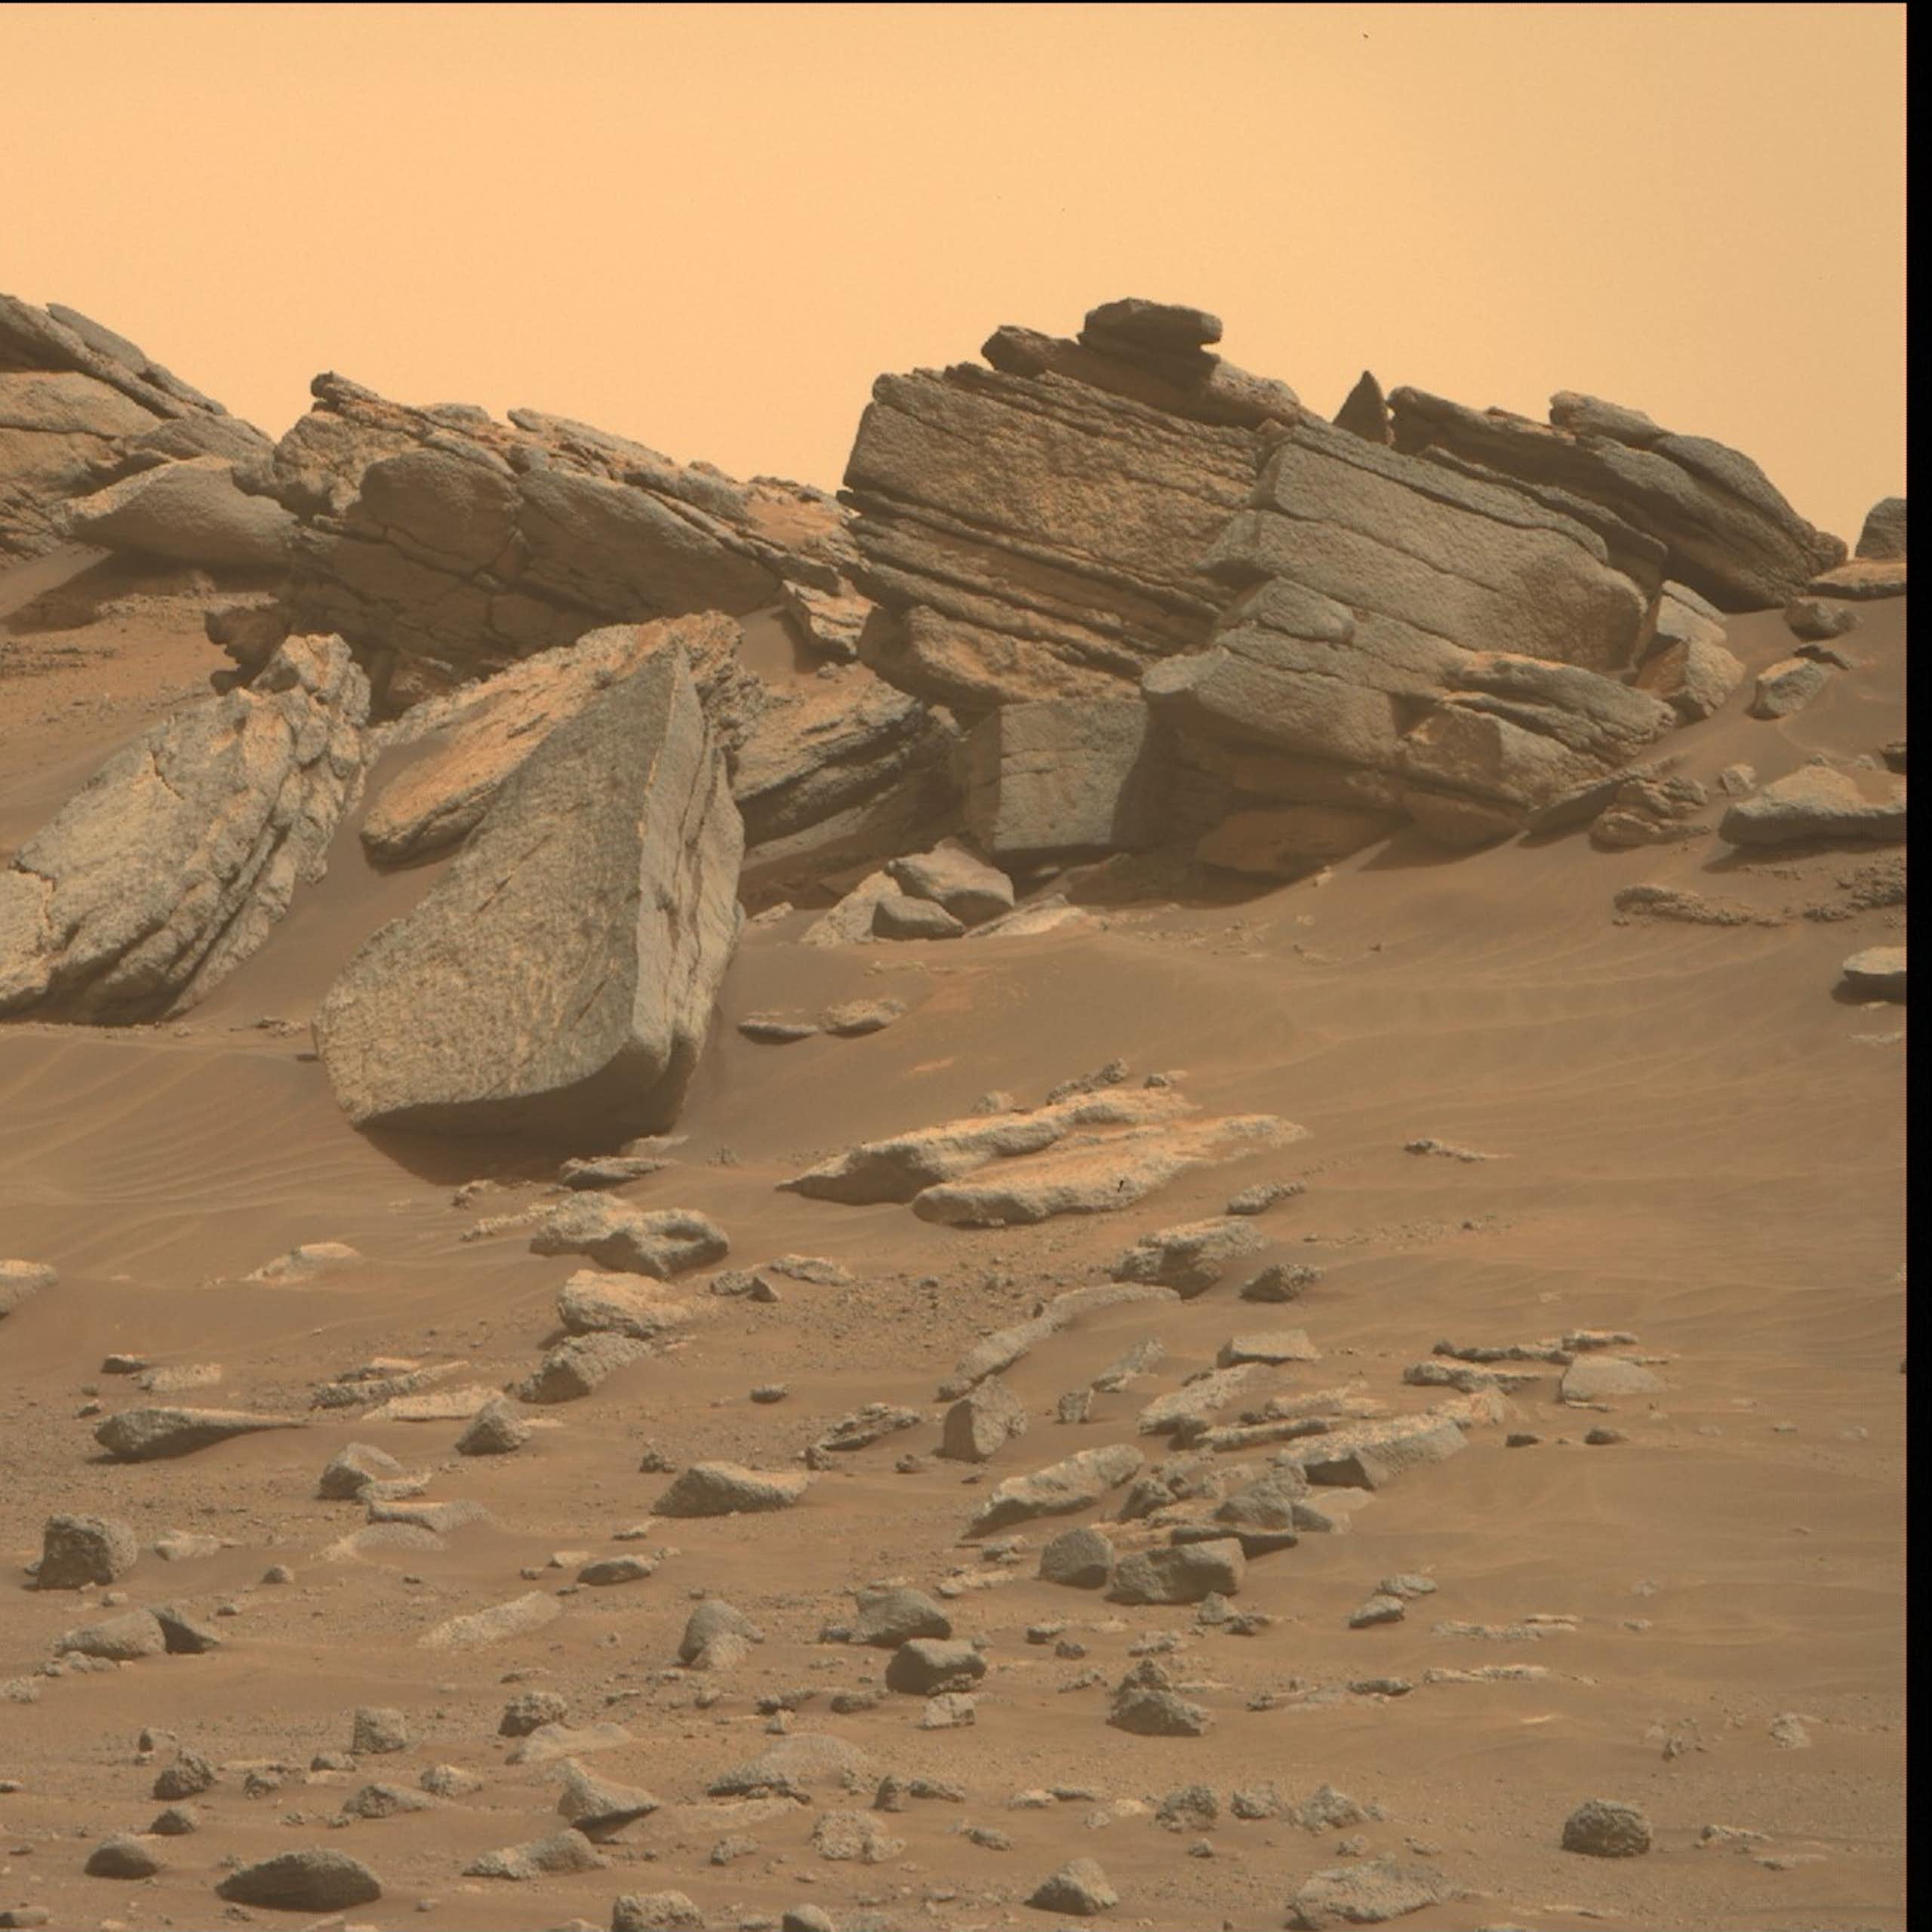 A photograph of the Martian surface shows a tangerine-colored sky and massive rocks sitting on rust-colored soil.